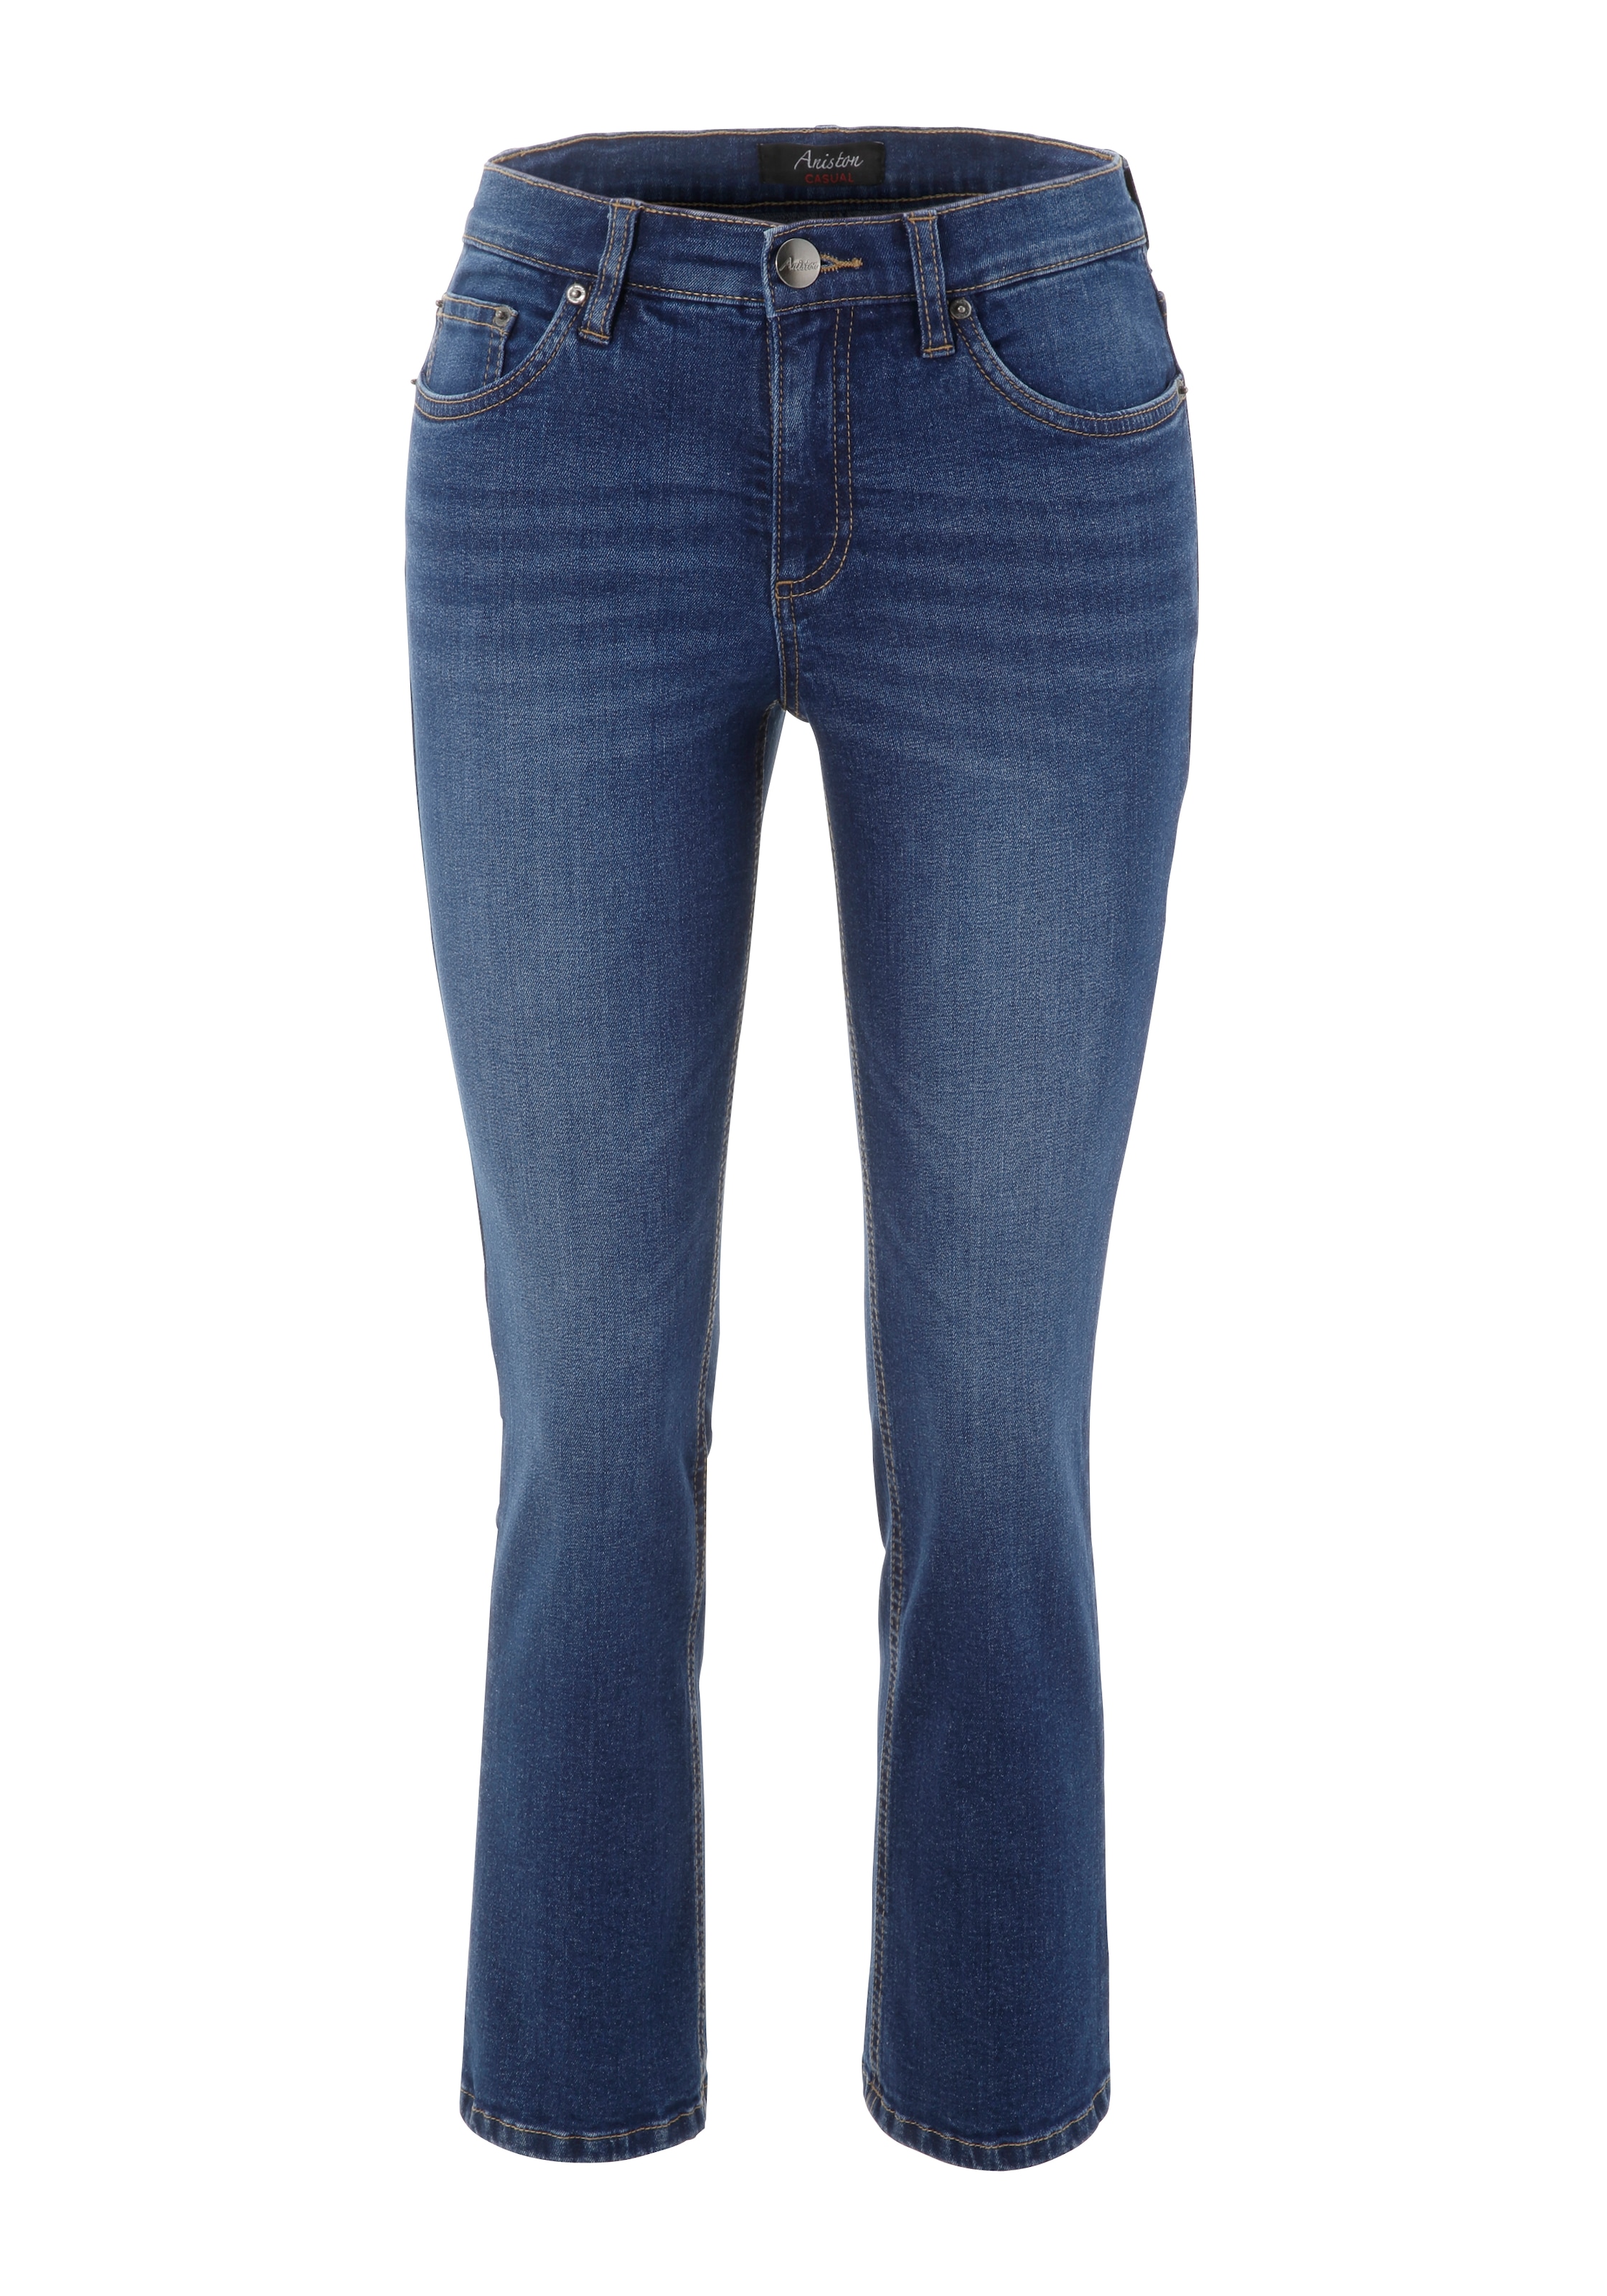 in 7/8-Länge CASUAL Aniston Bootcut-Jeans, bei trendiger OTTO online